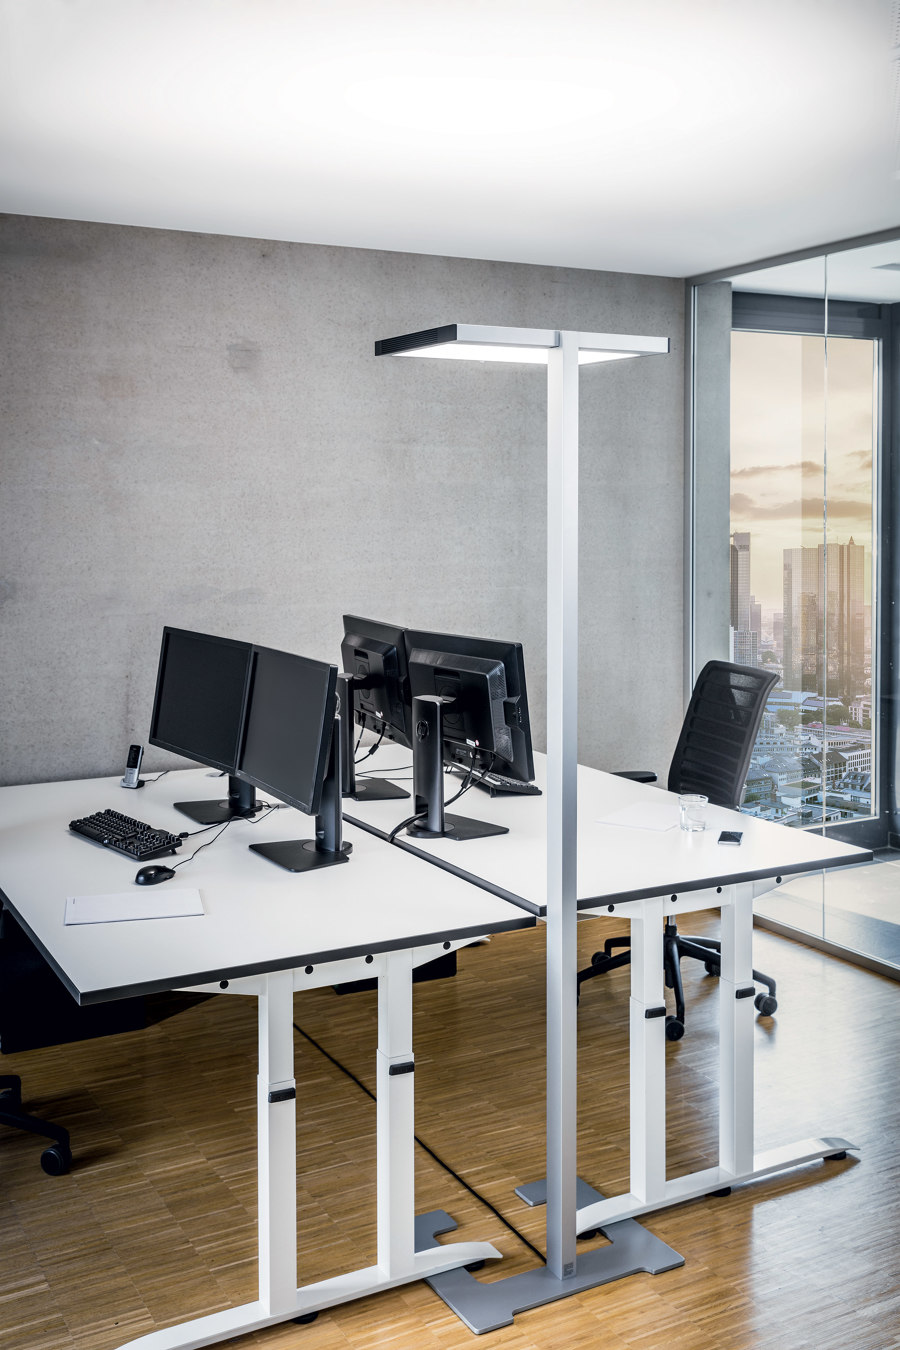 LUCTRA VITAWORK: Energy saving means environmental protection | Architecture